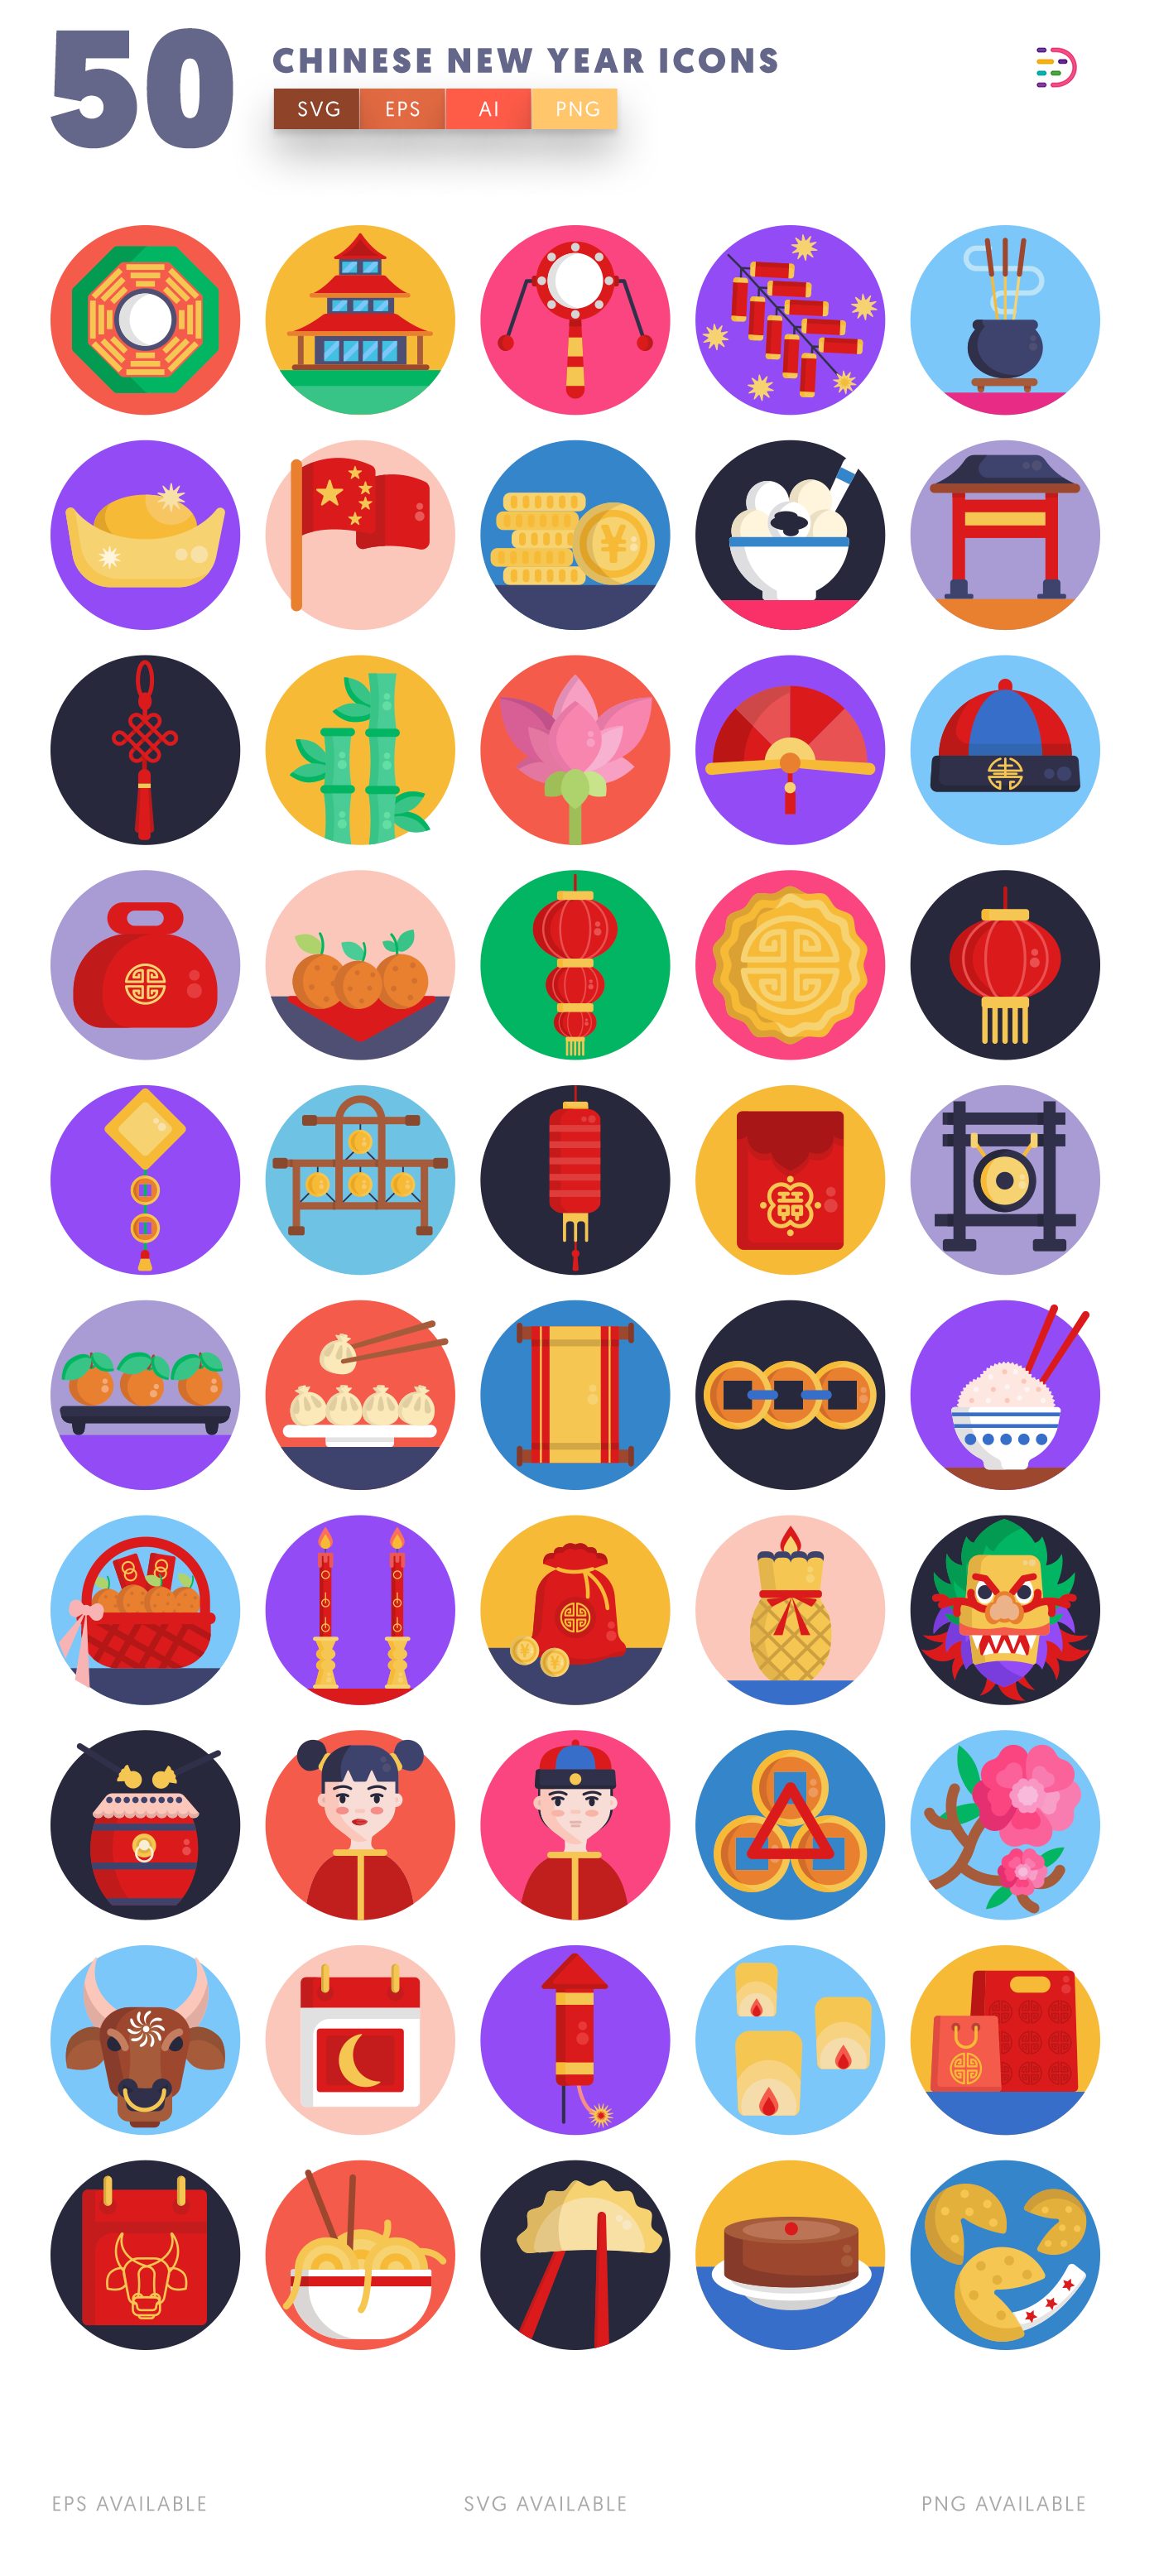 Chinese New Year icon pack